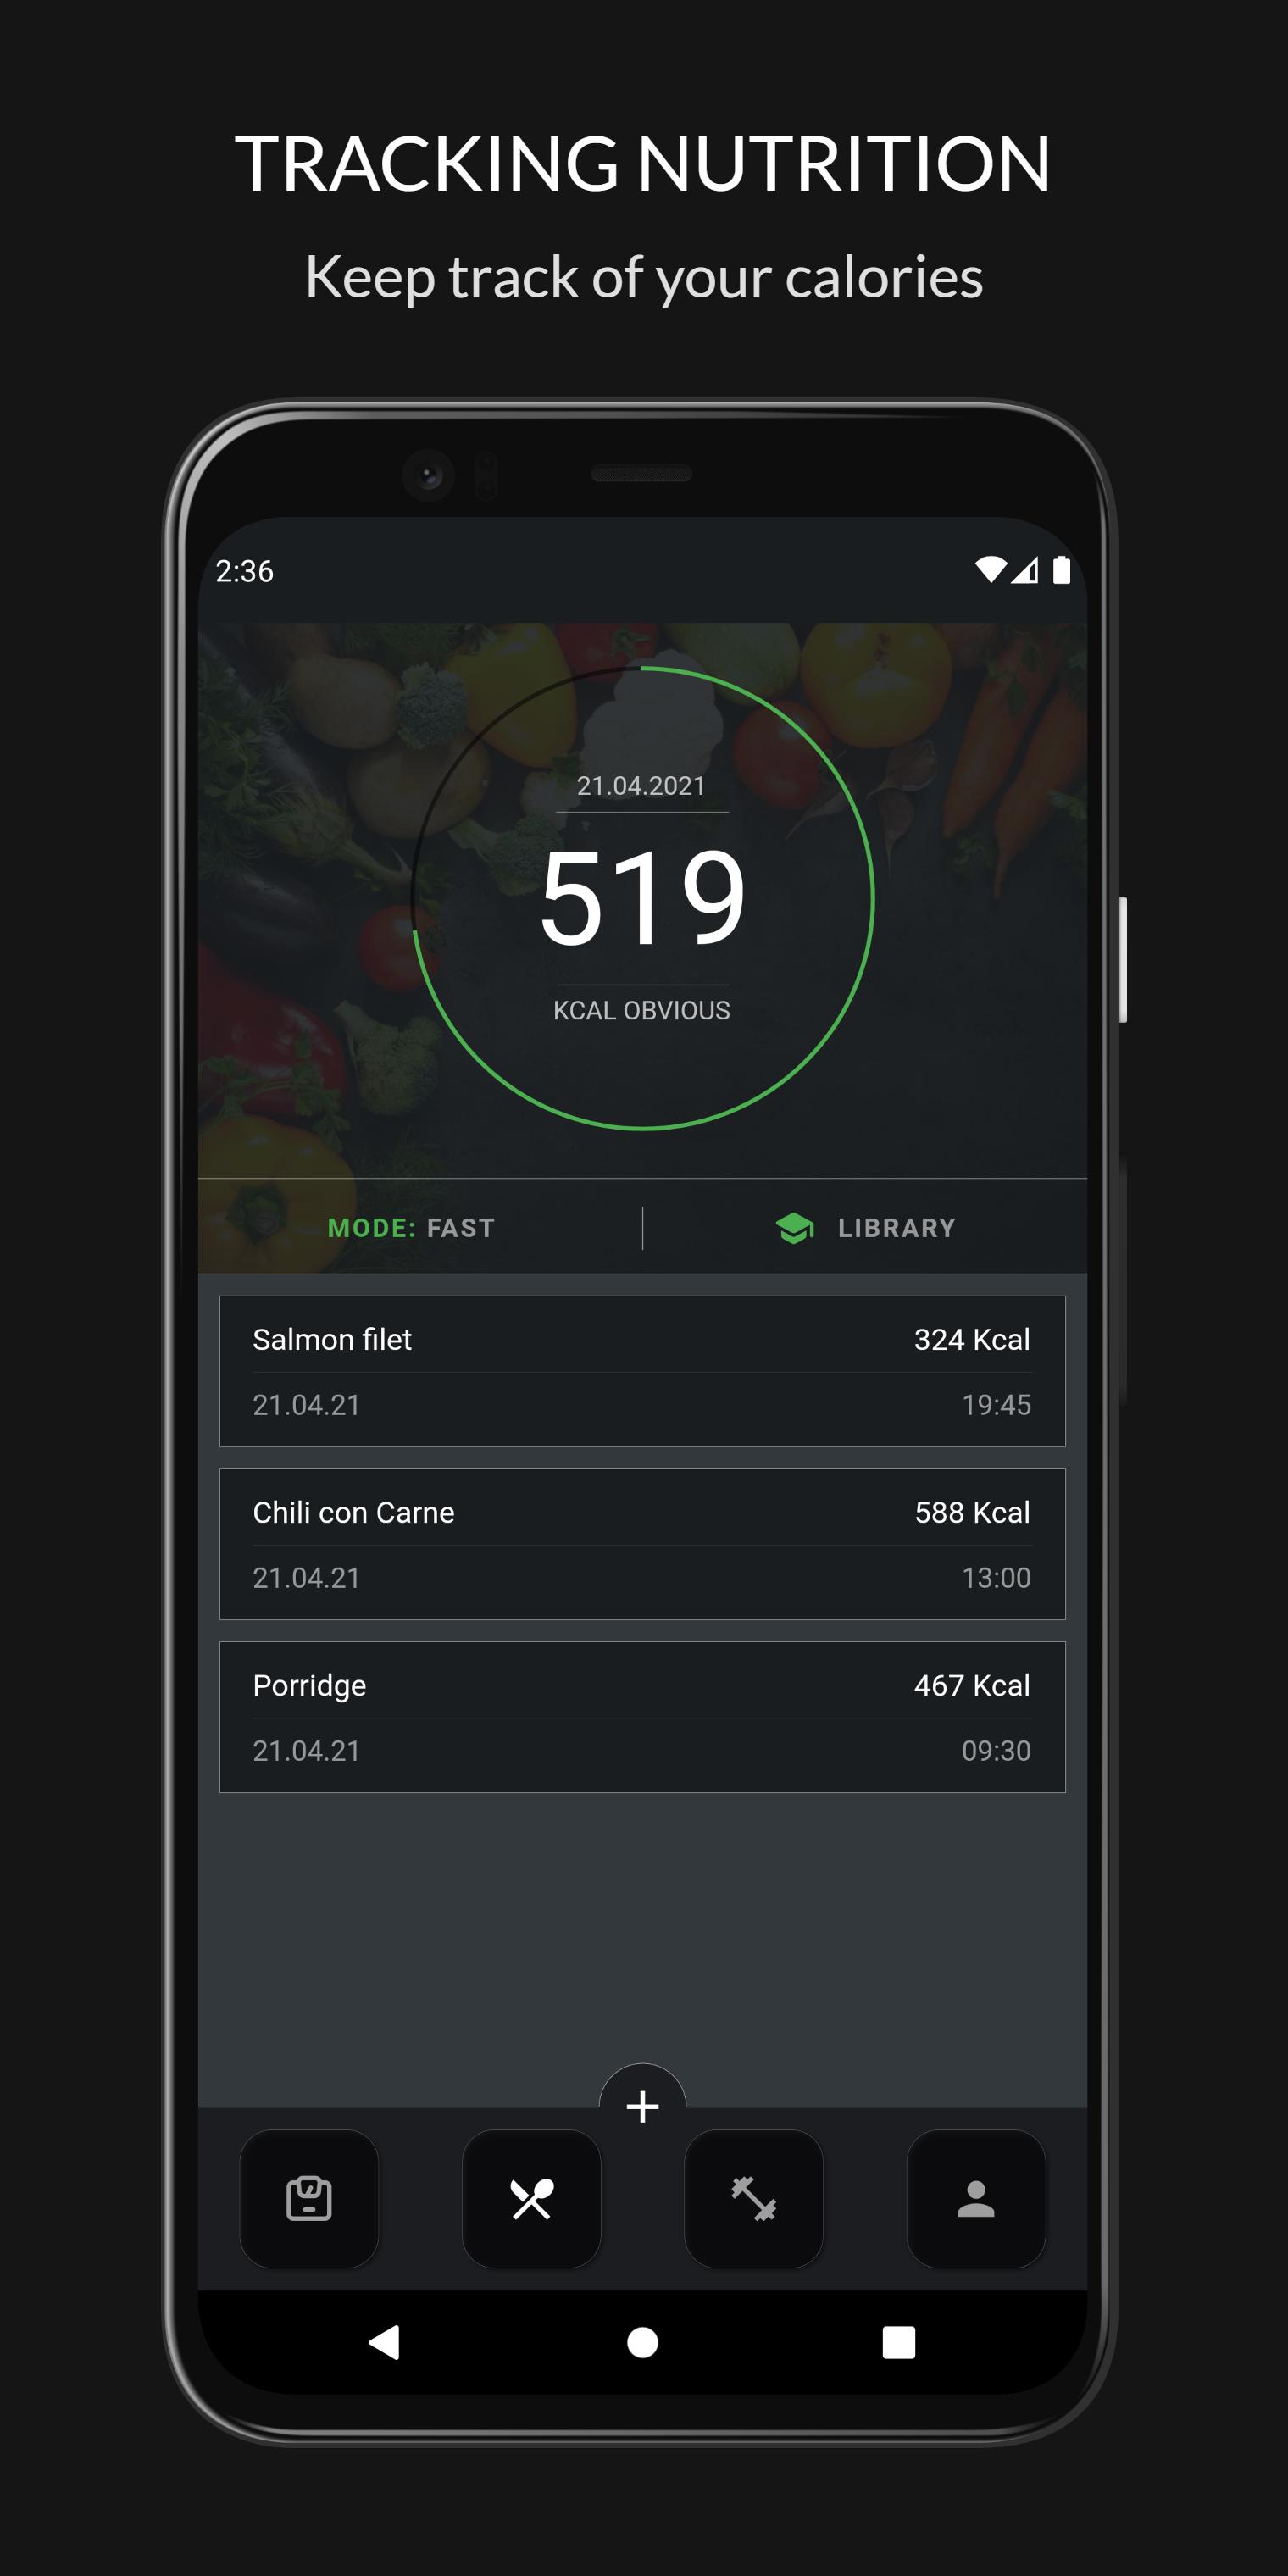 All in One Fitness - Weight Loss, Workouts & More 1.2.2 Screenshot 7